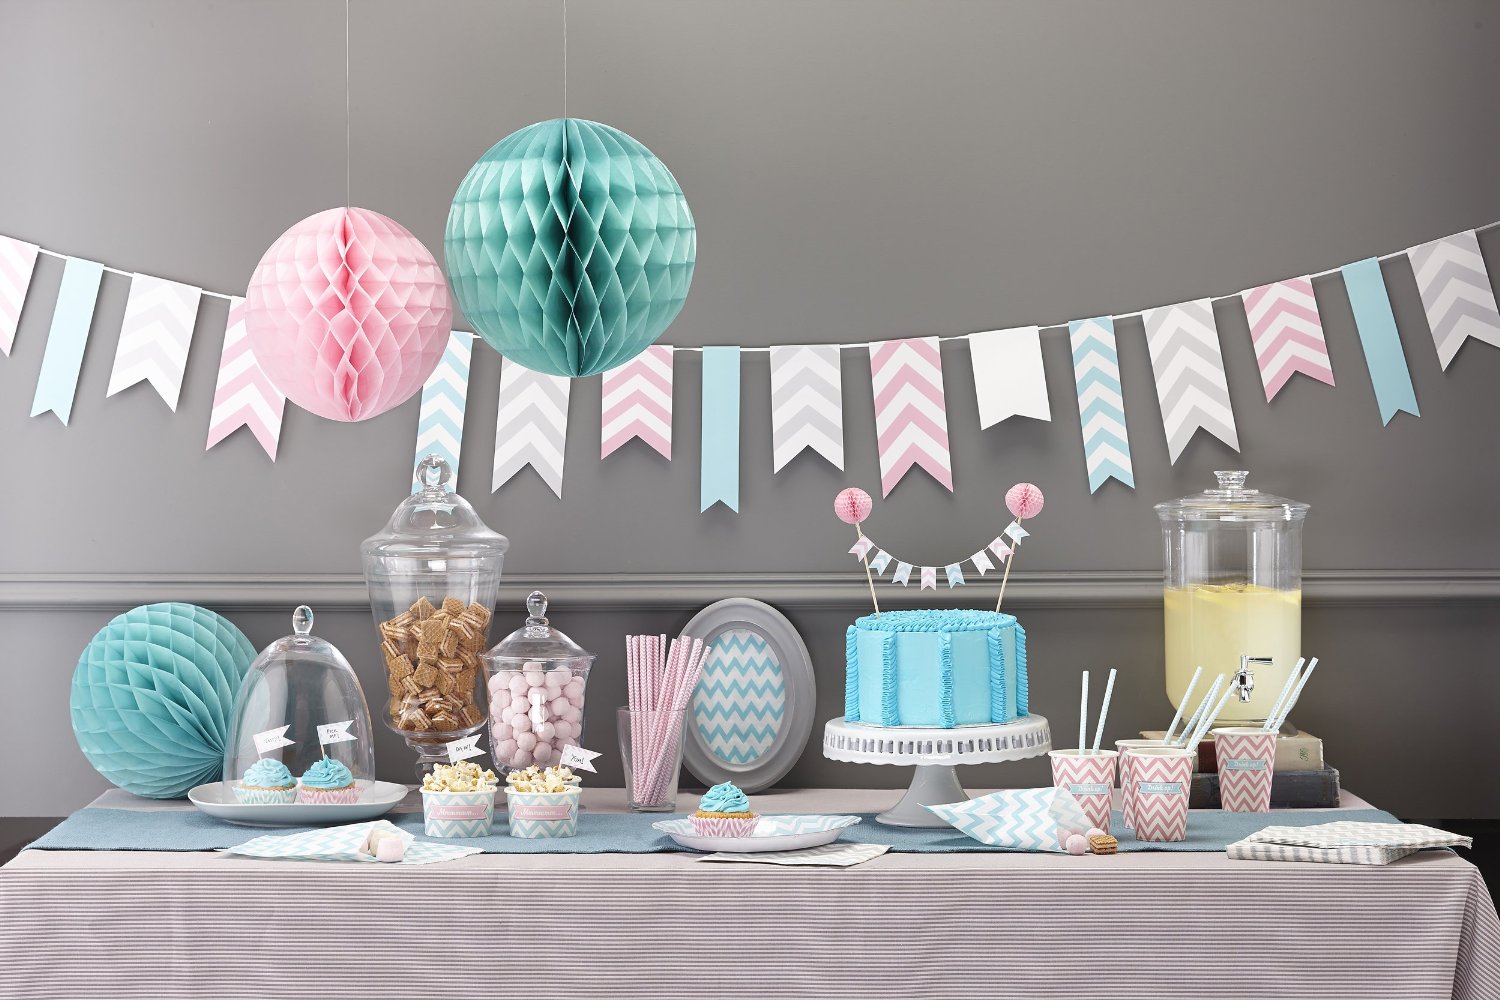 Decoration Tips for Parties